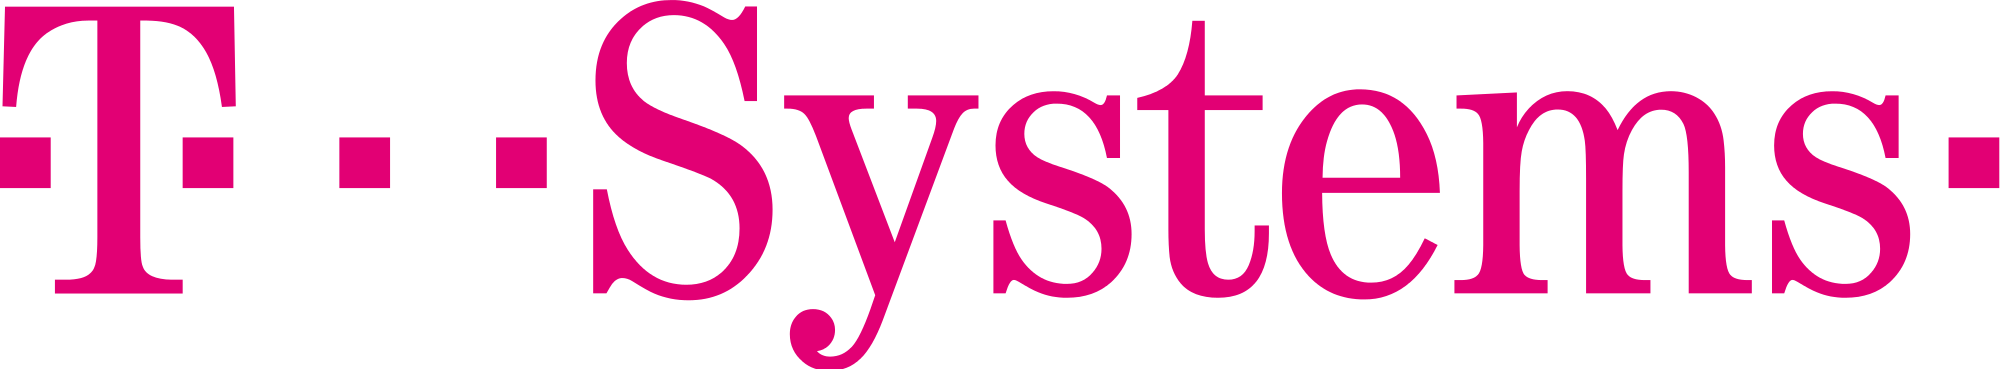 logo T systems